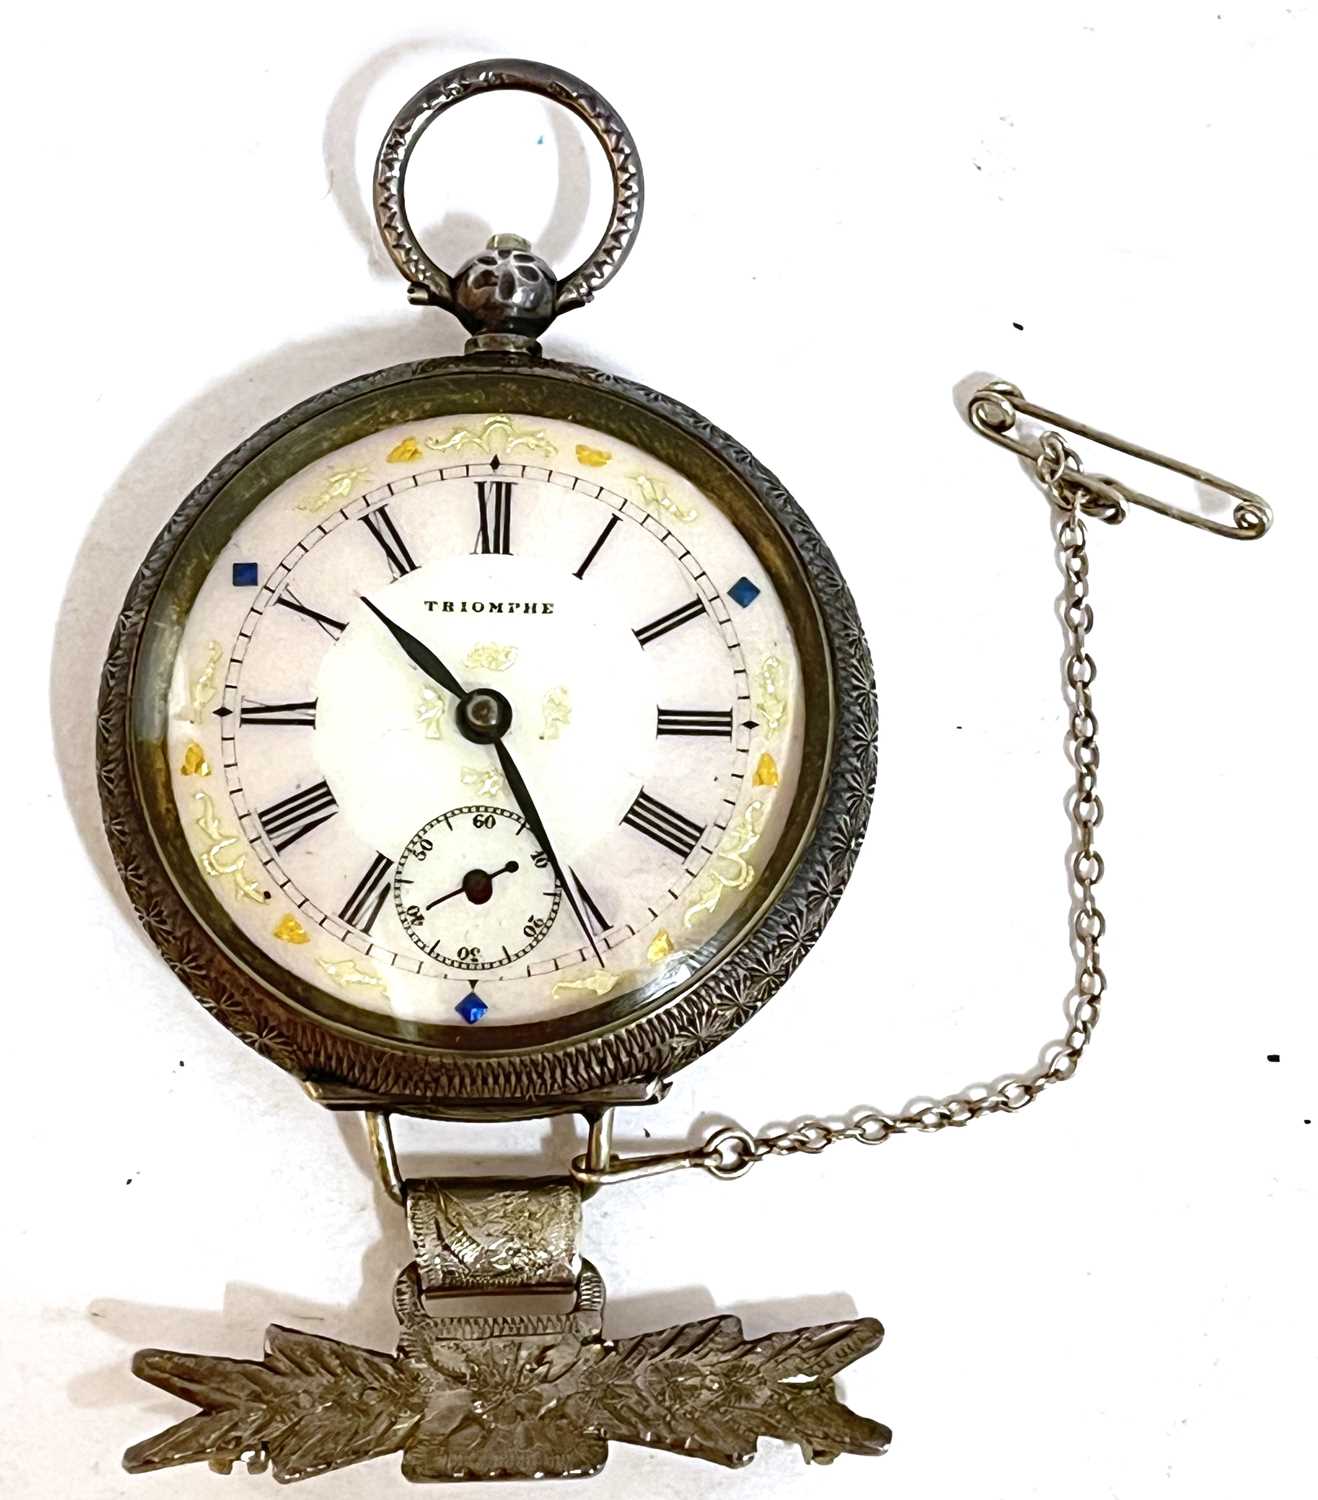 White metal pocket watch with pin brooch, the pocket watch is stamped 935 in the case back, the dial